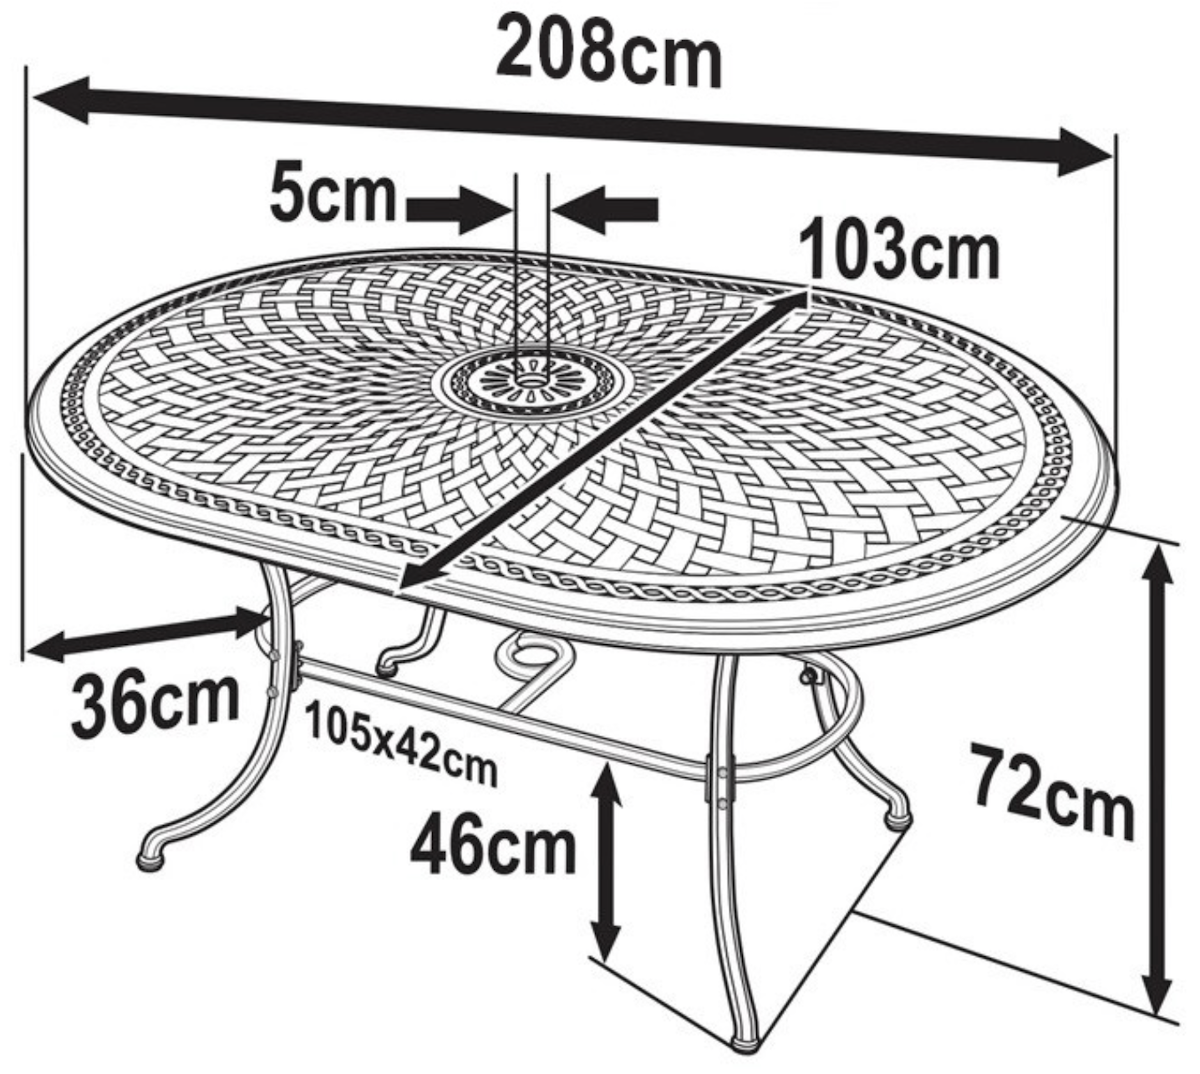 Catherine 6-seater Garden Table Dimensions